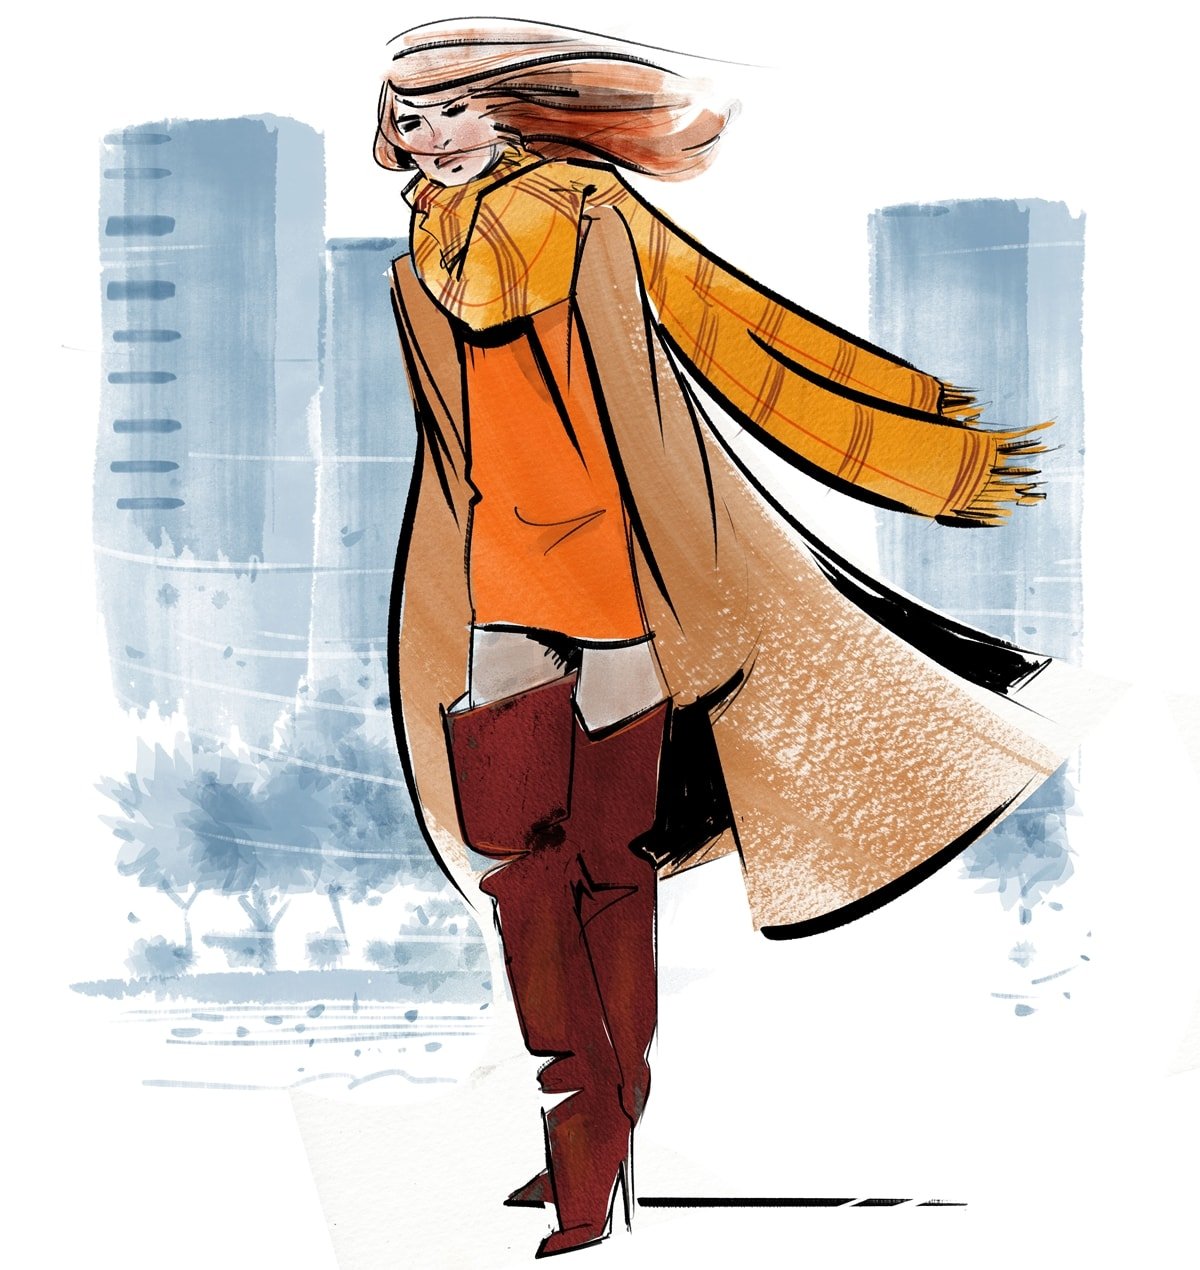 A young red-haired woman dressed in winter fashion with a warm coat, scarf, and over-the-knee boots